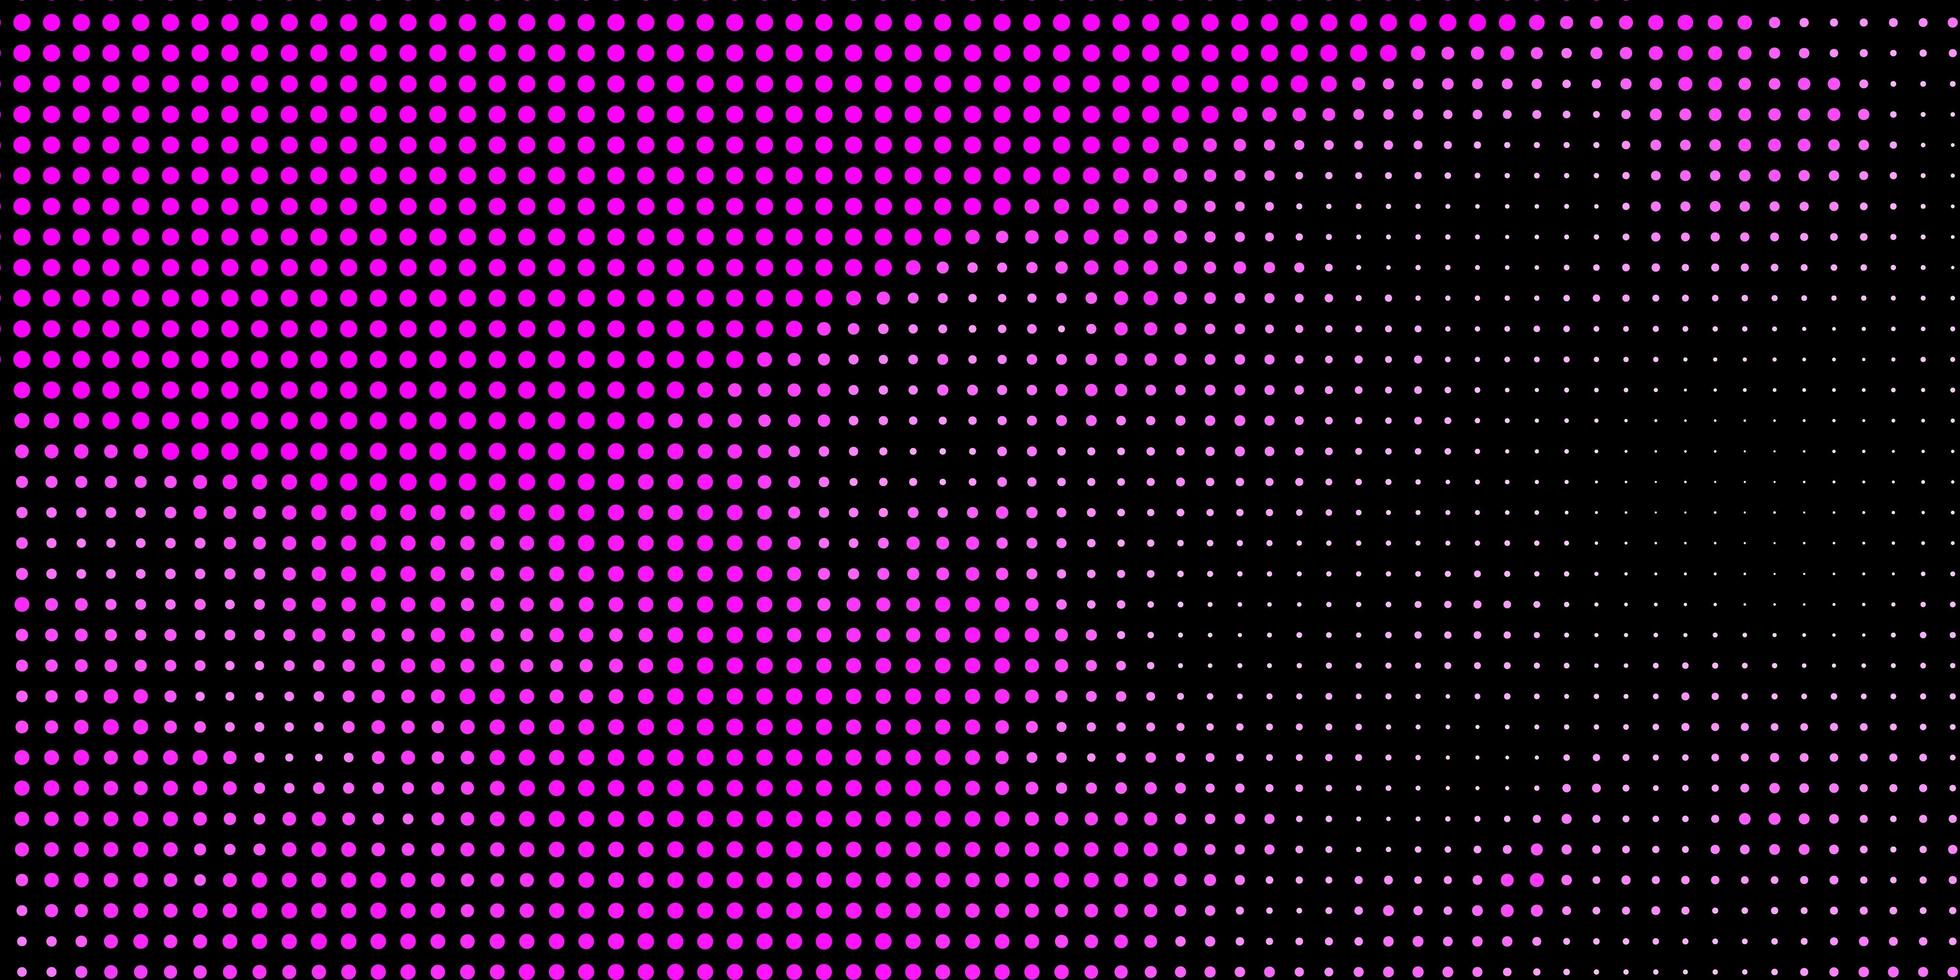 Light Purple, Pink vector background with circles.